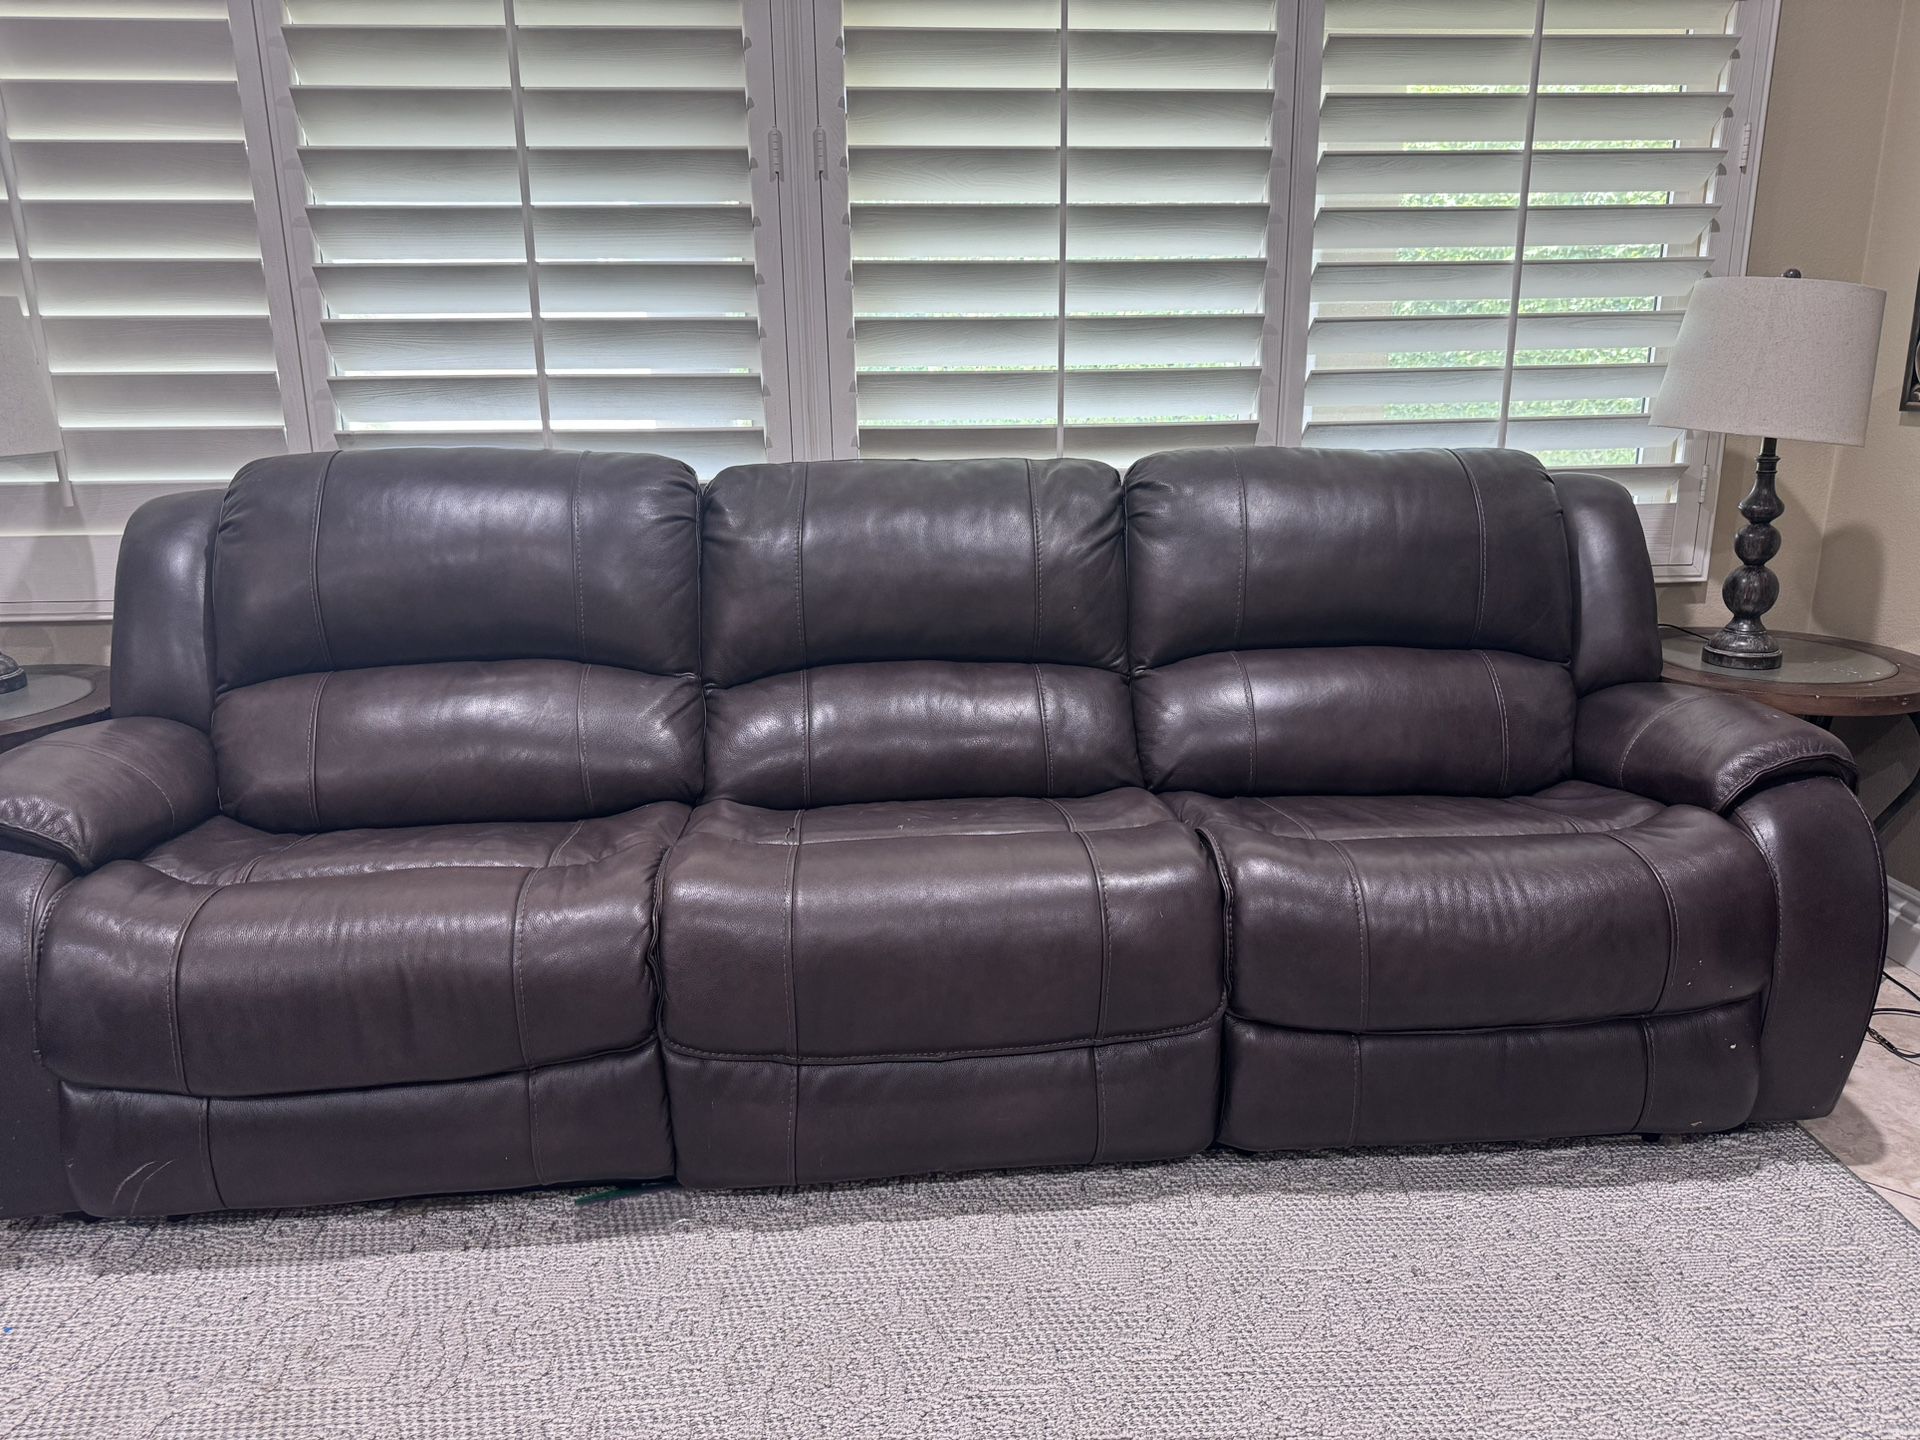 Used Leather Couches (2) 